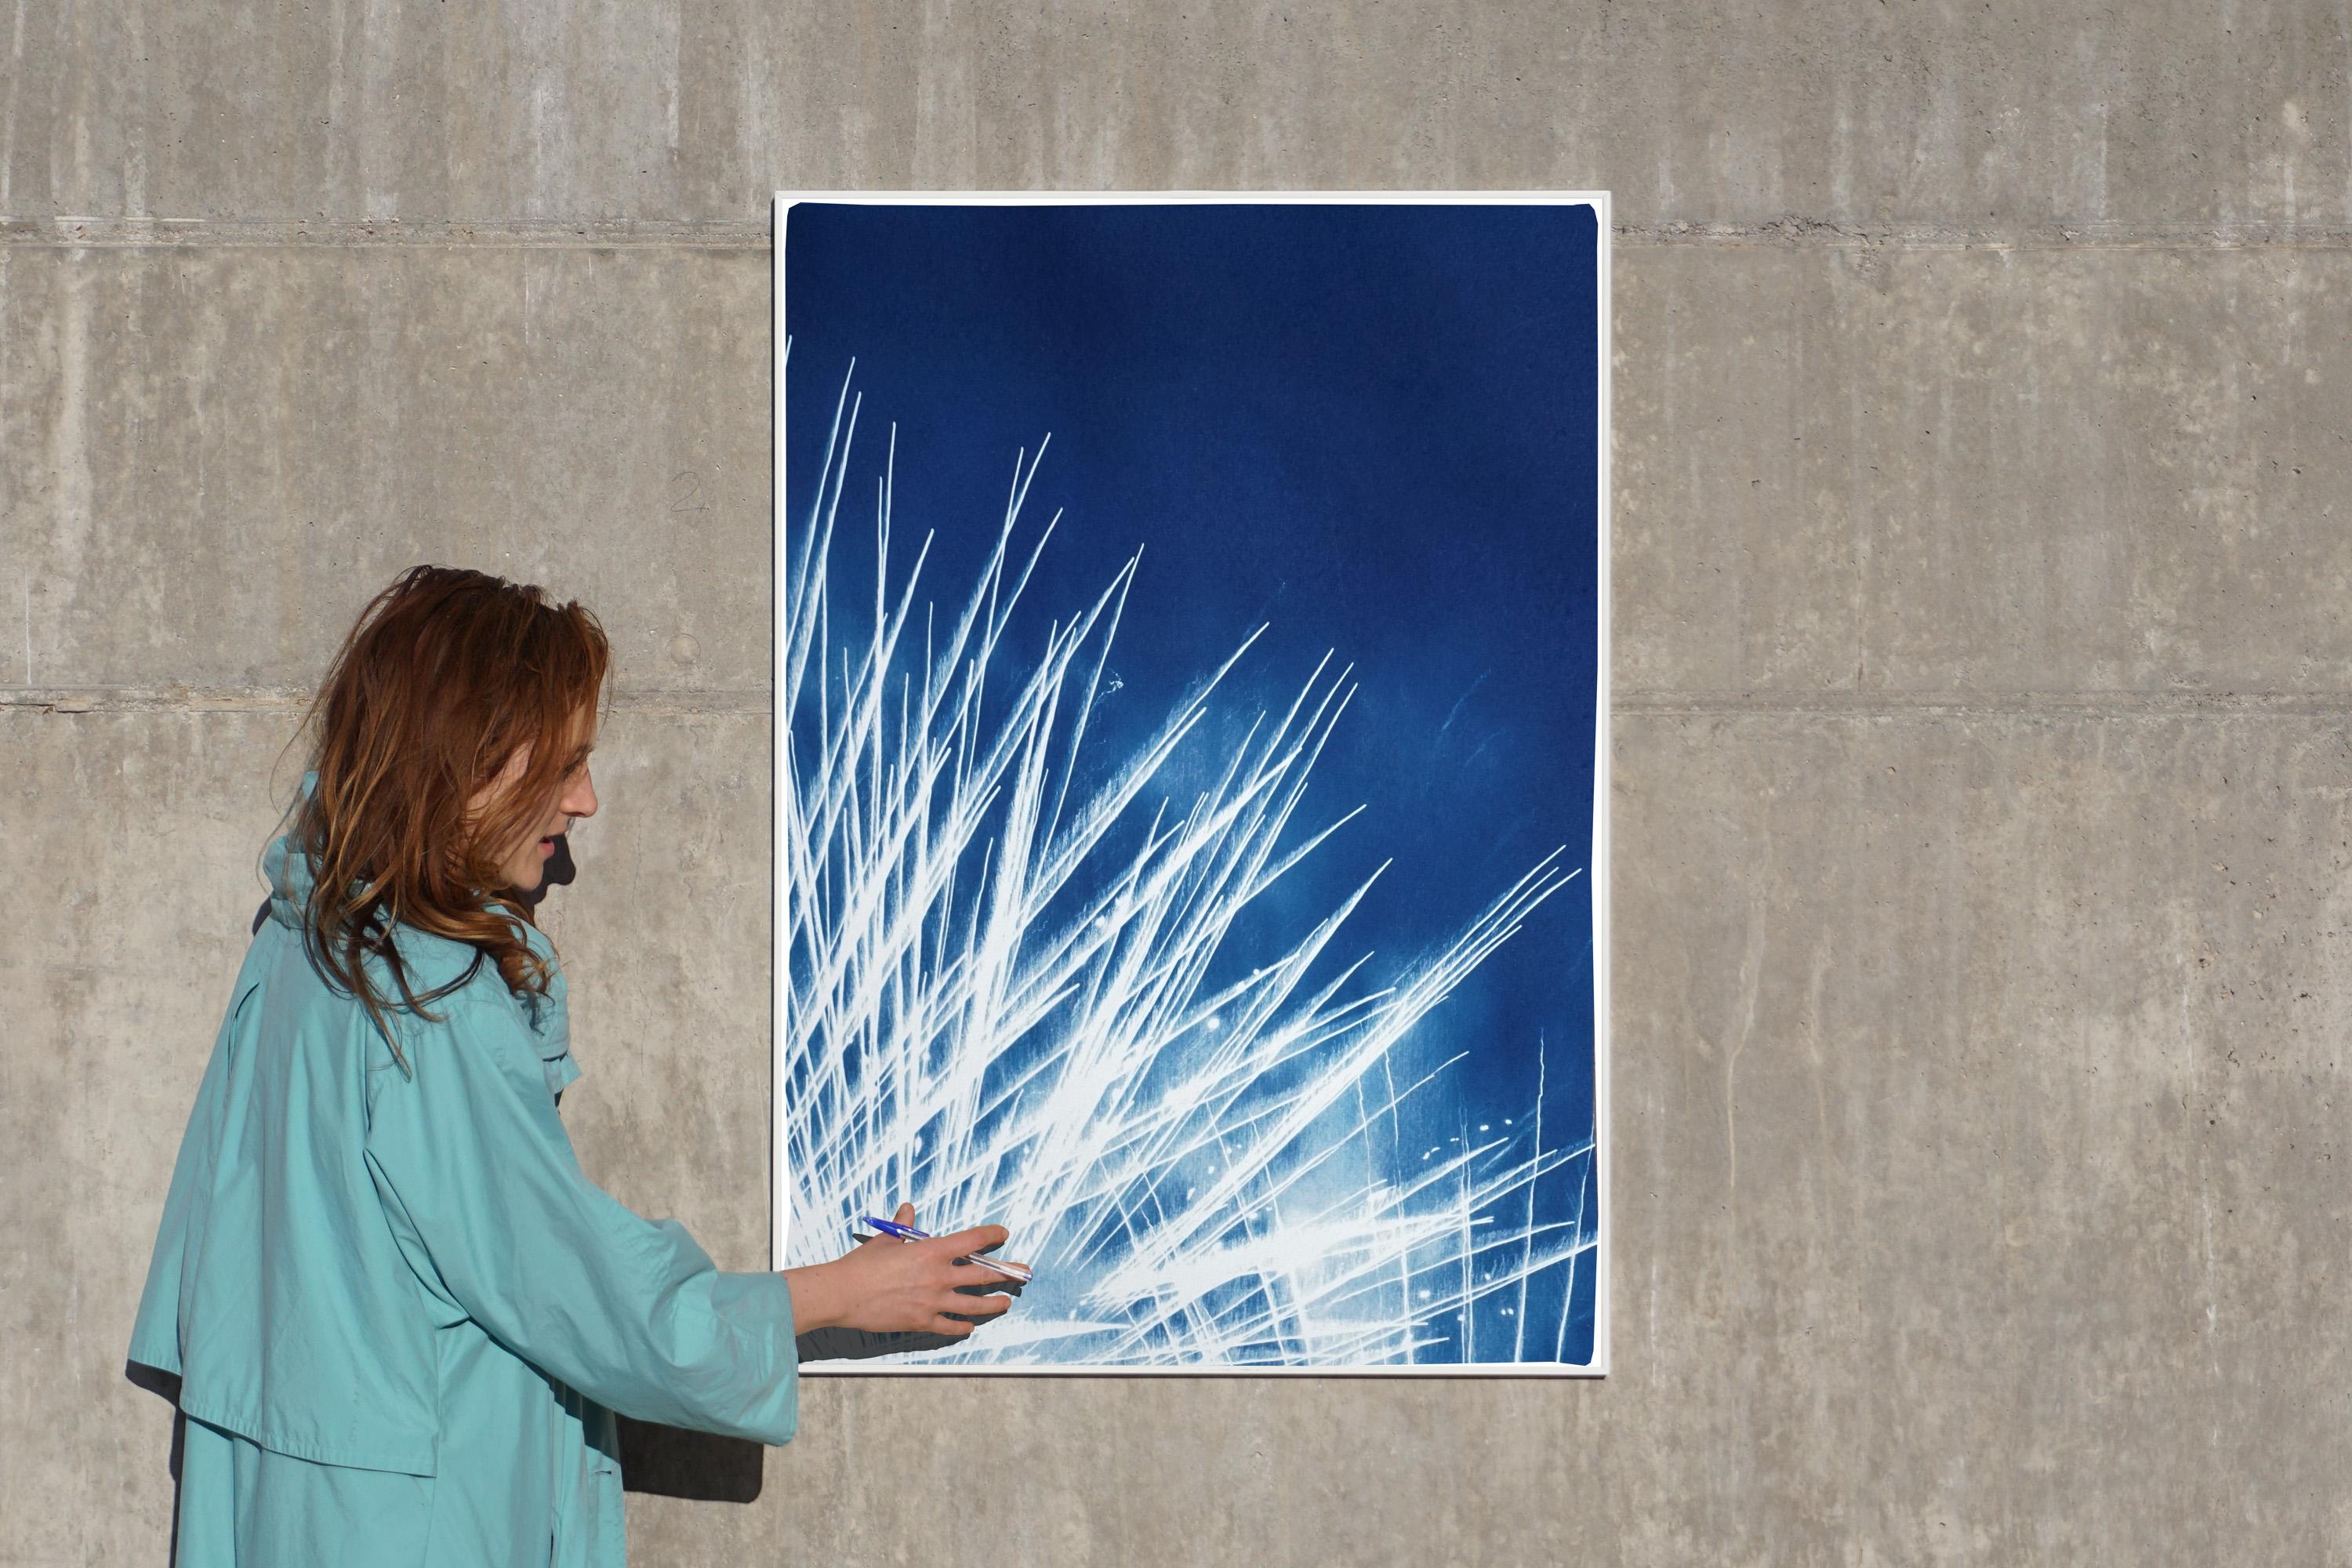 Nighttime Fireworks Flaring, Nocturnal Skyline, Abstract Lights in White & Blue For Sale 3